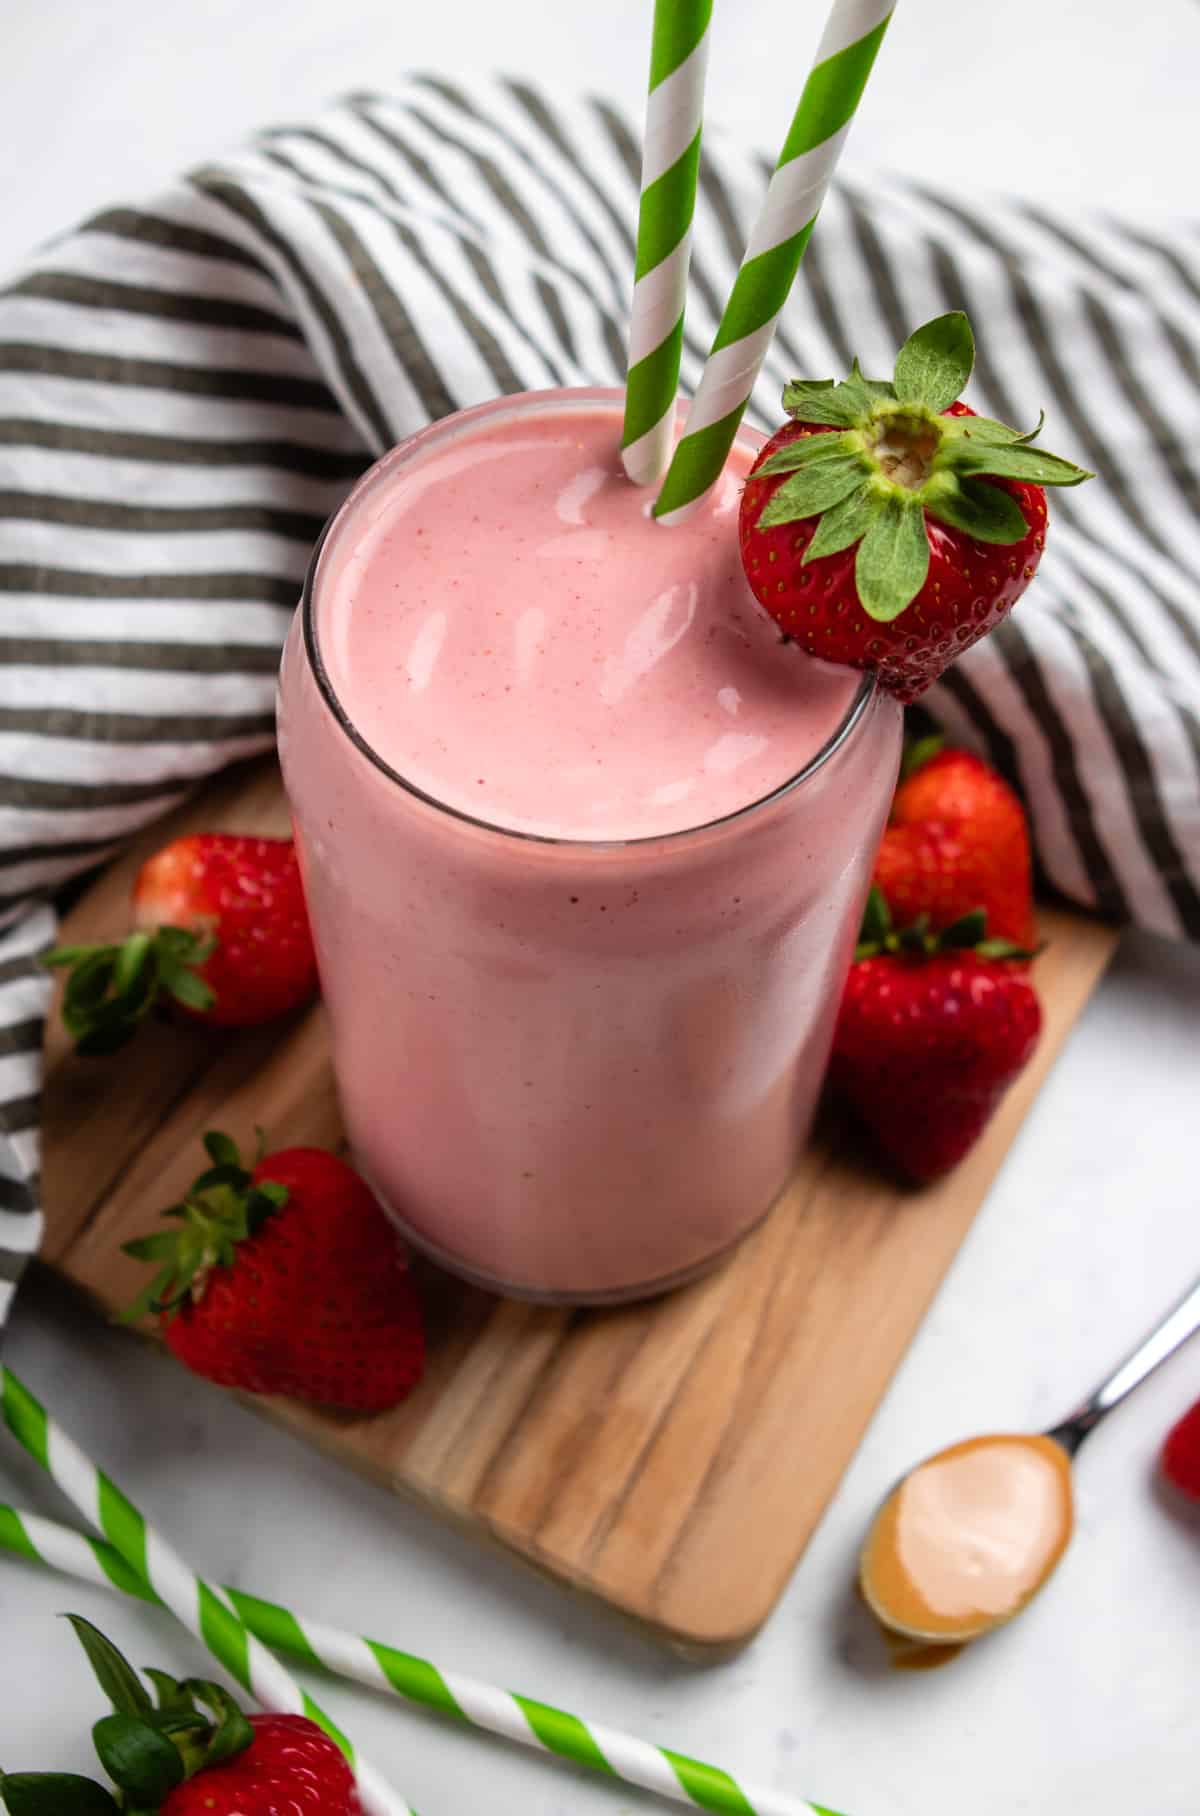 Strawberry Peanut butter smoothie in glass with green straws and strawberry garnish.